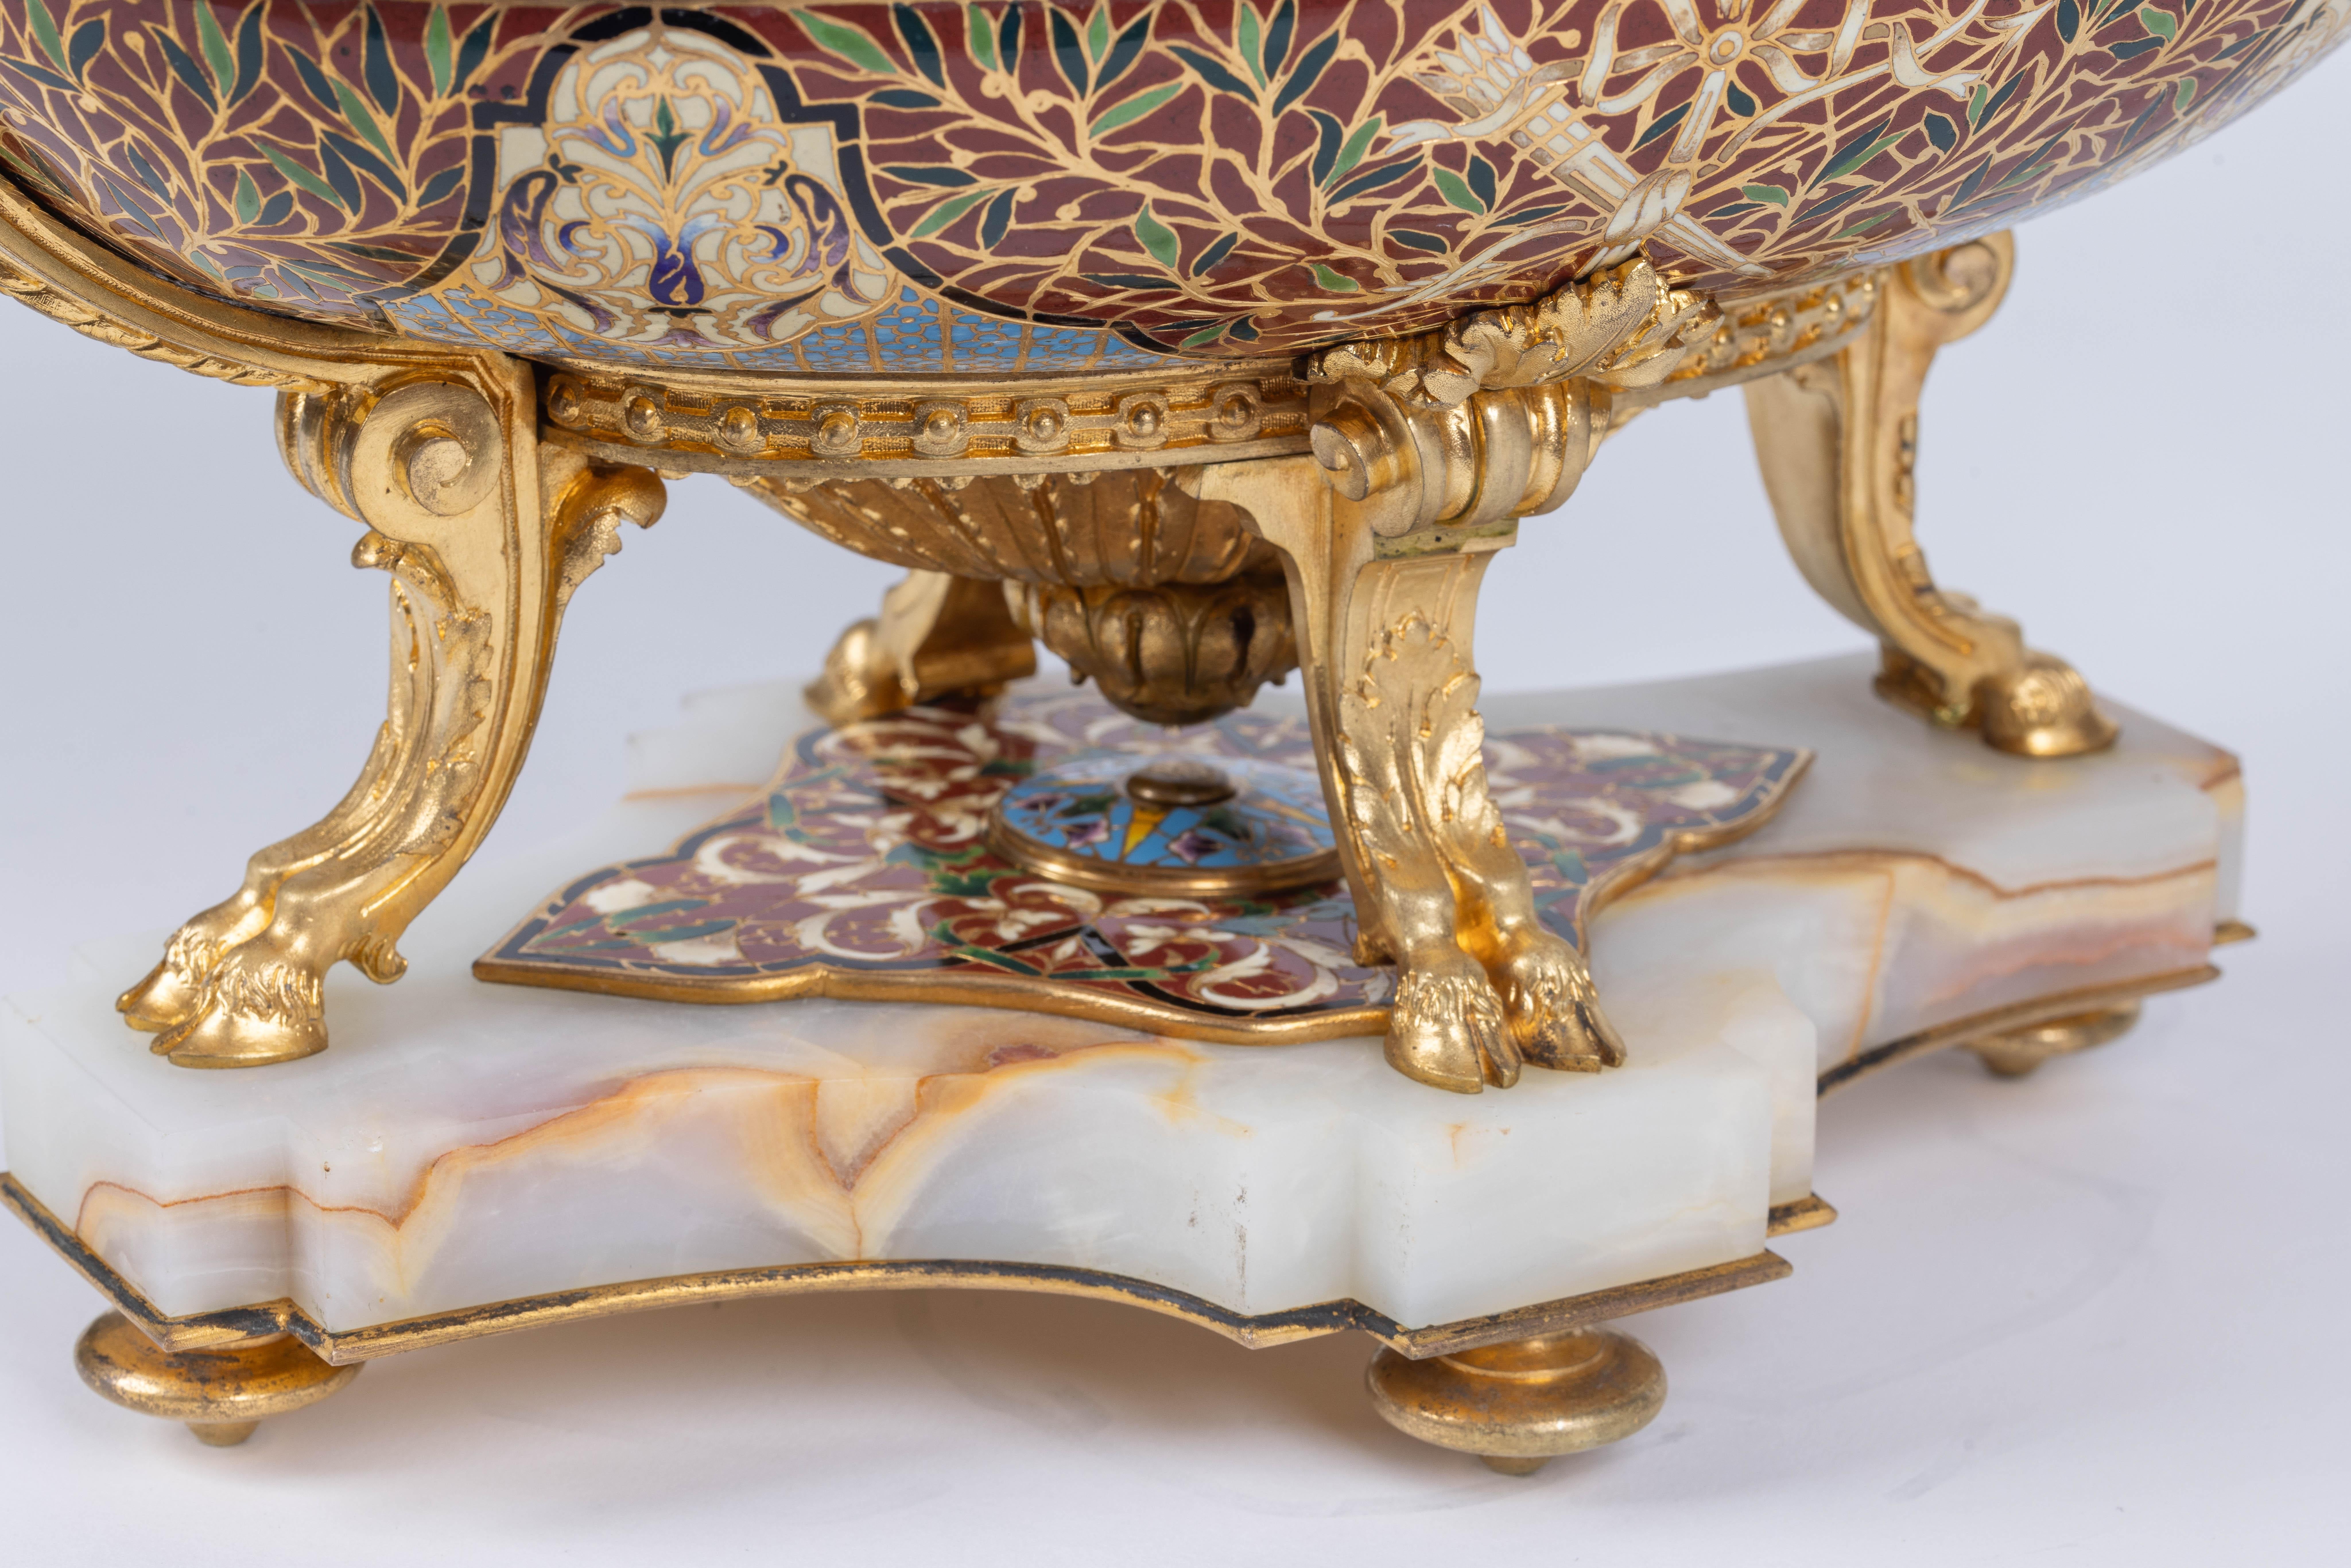 A Fine French Ormolu, Champleve Enamel, and Onyx Figural Centerpiece Jardiniere For Sale 3